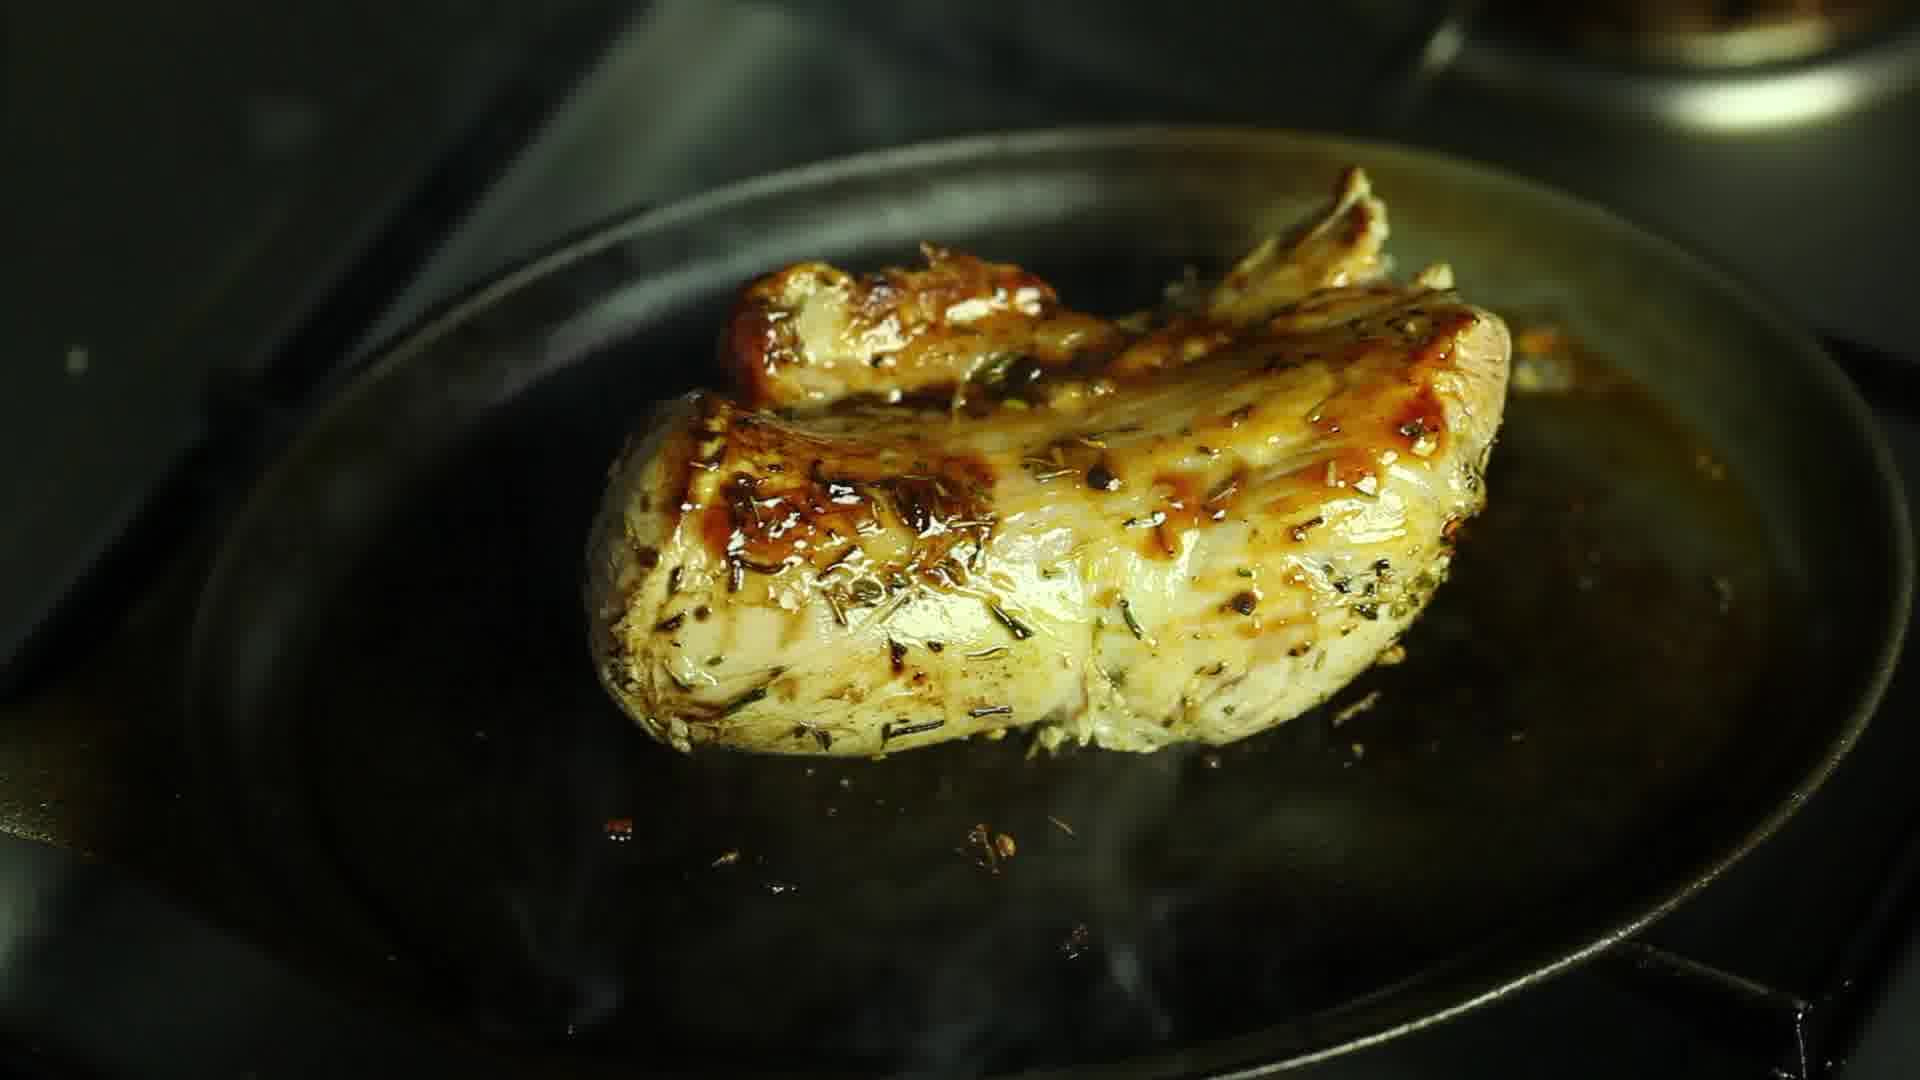 How To Cook A Pork Tenderloin In The Oven
 How to Cook Pork Tenderloin in the Oven with